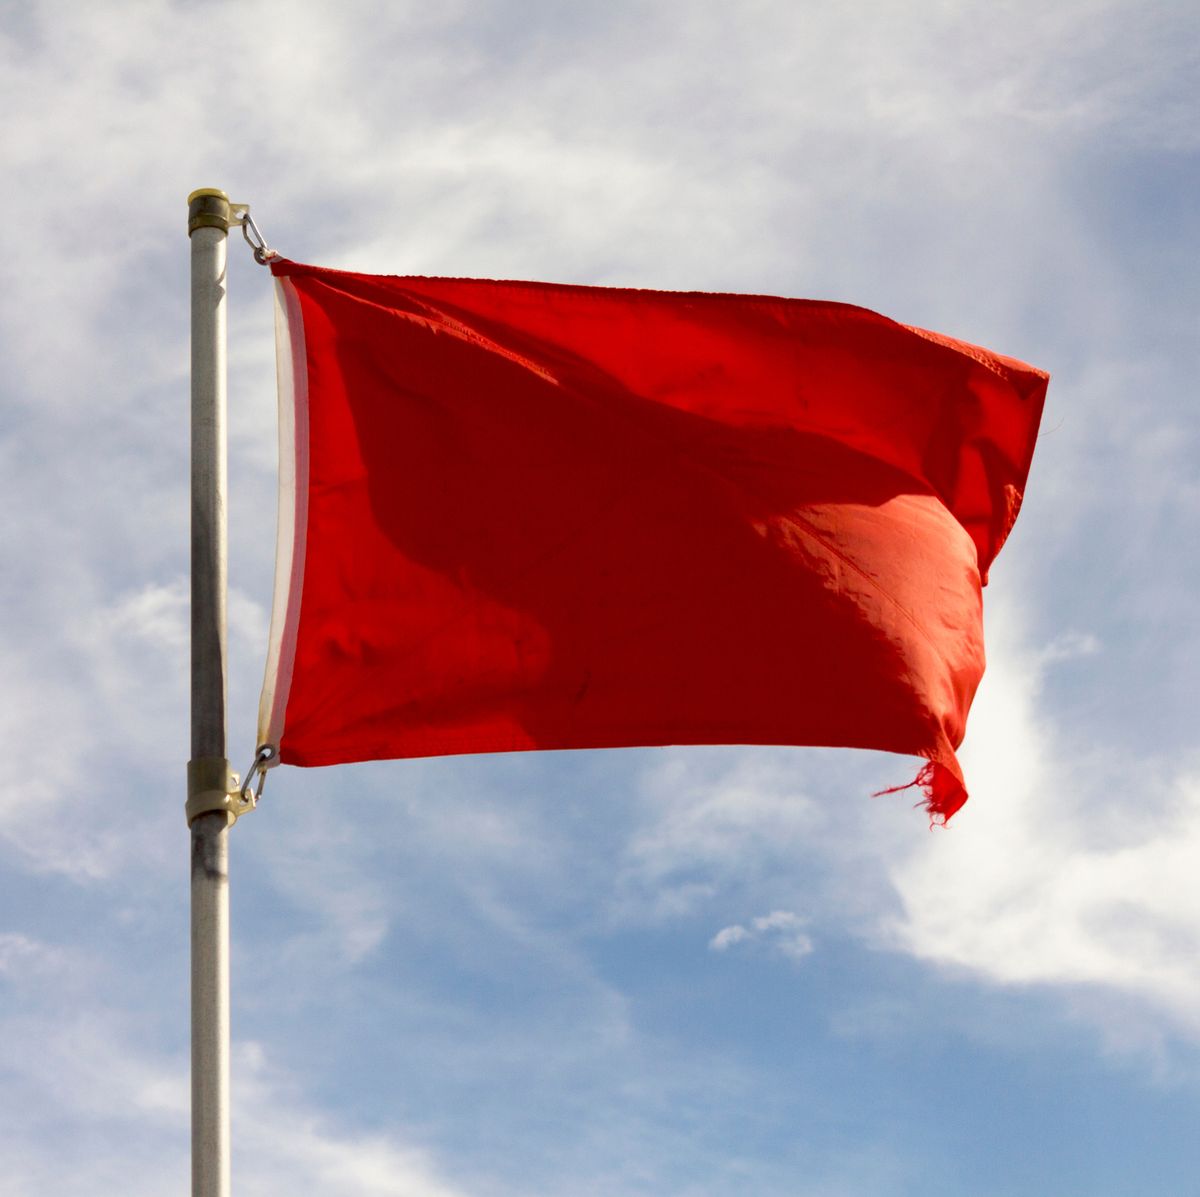 Relationship red flags to look out for